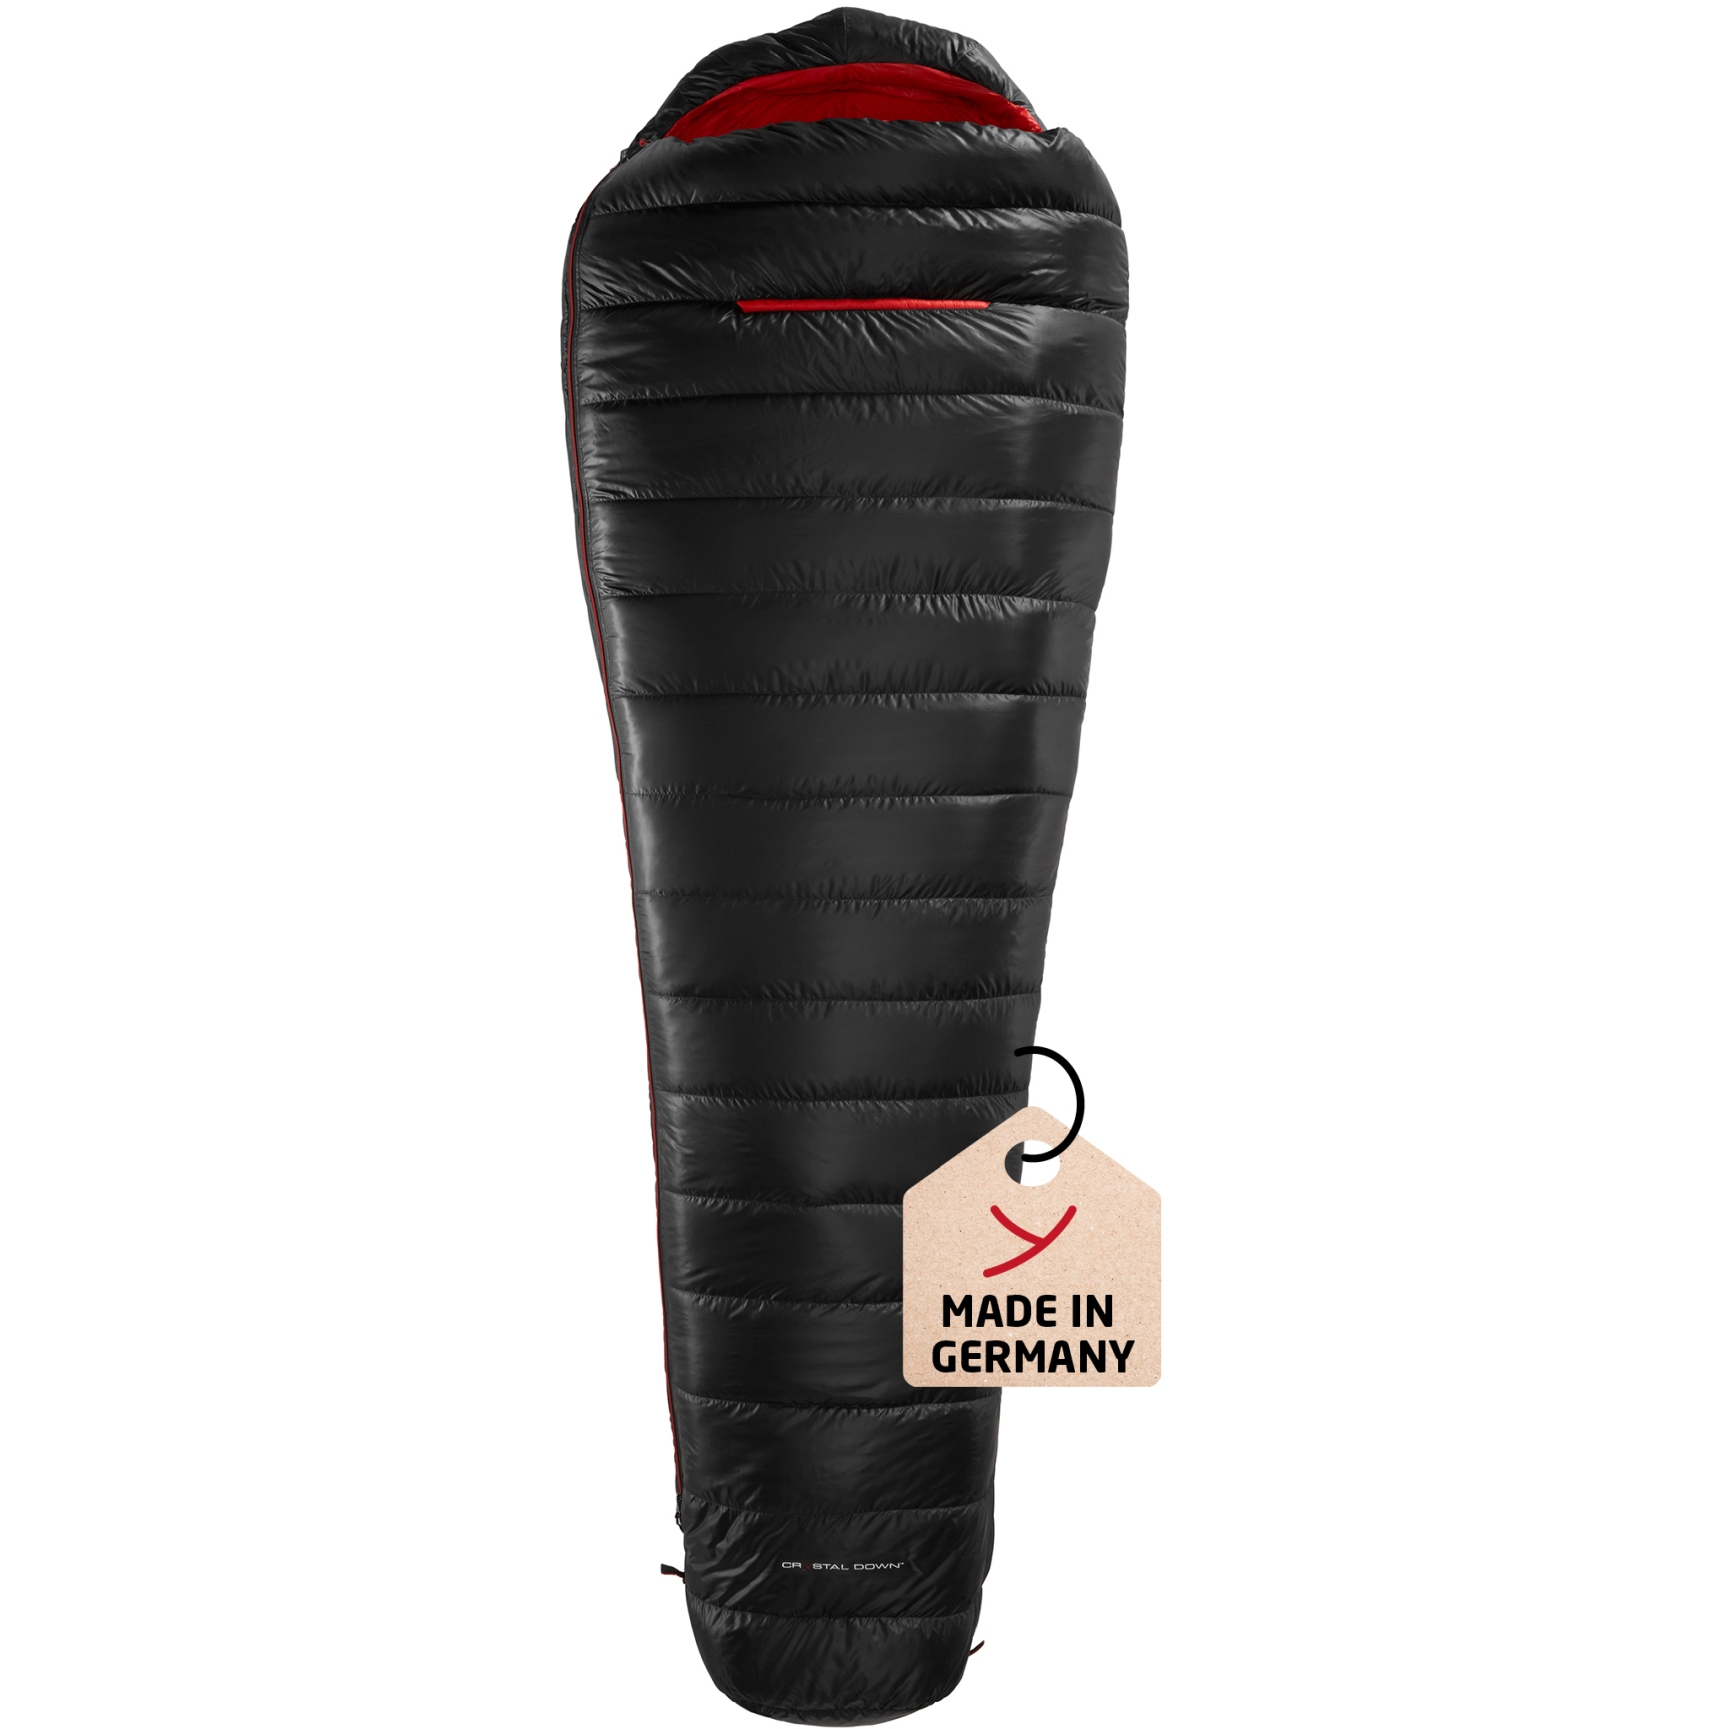 Picture of Y by Nordisk VIB 250 M Sleeping Bag - black/fiery red